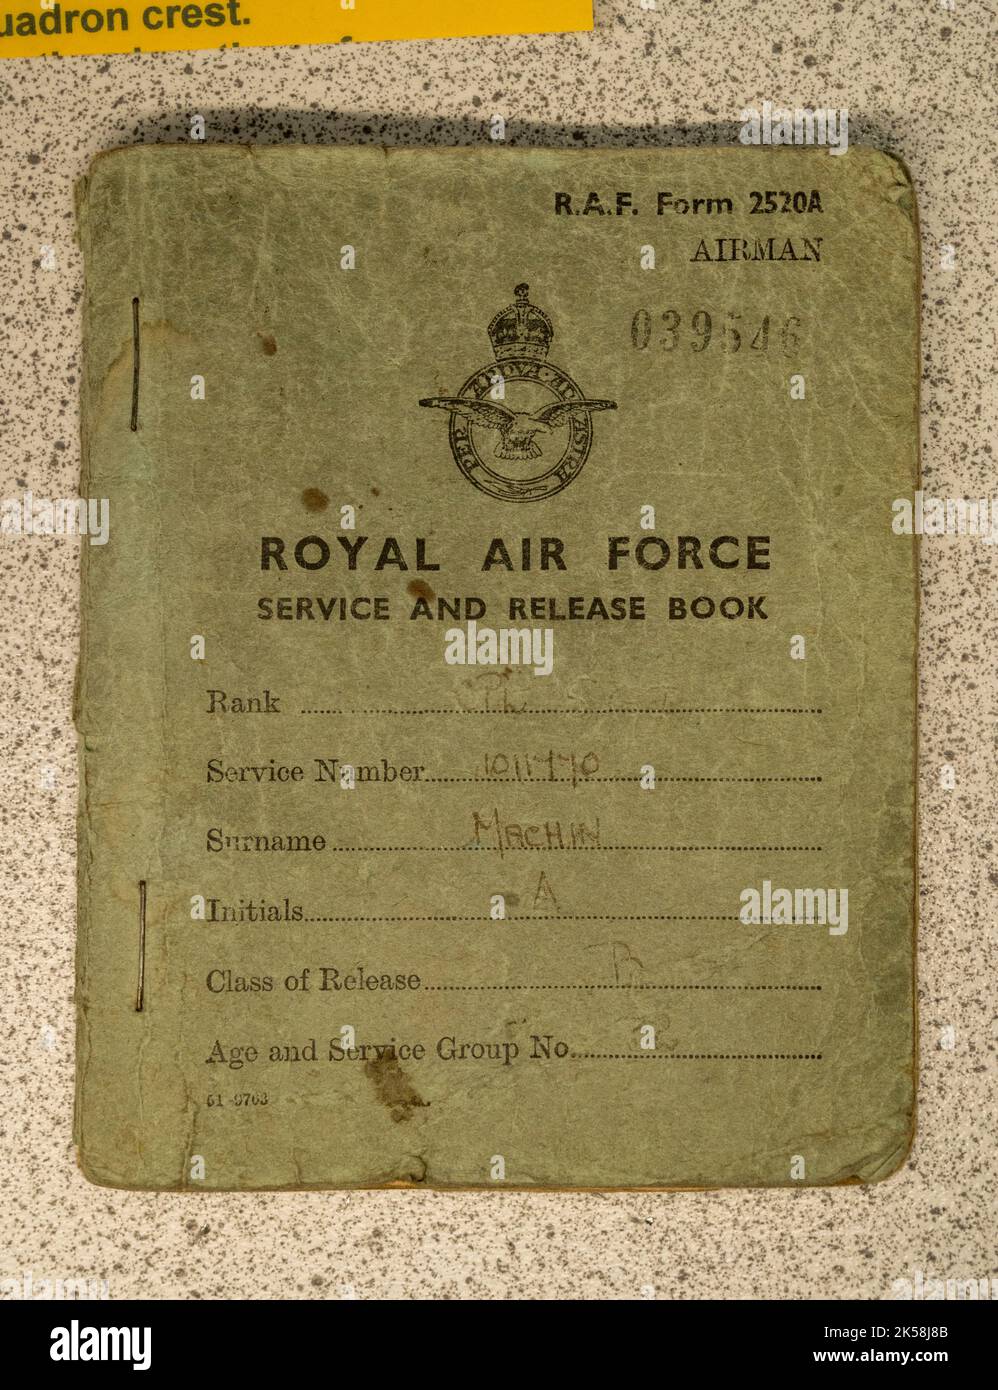 A Royal Air Force Service and Release Book in the Spitfire and Hurricane Memorial Museum, Ramsgate, Kent, UK. Stock Photo